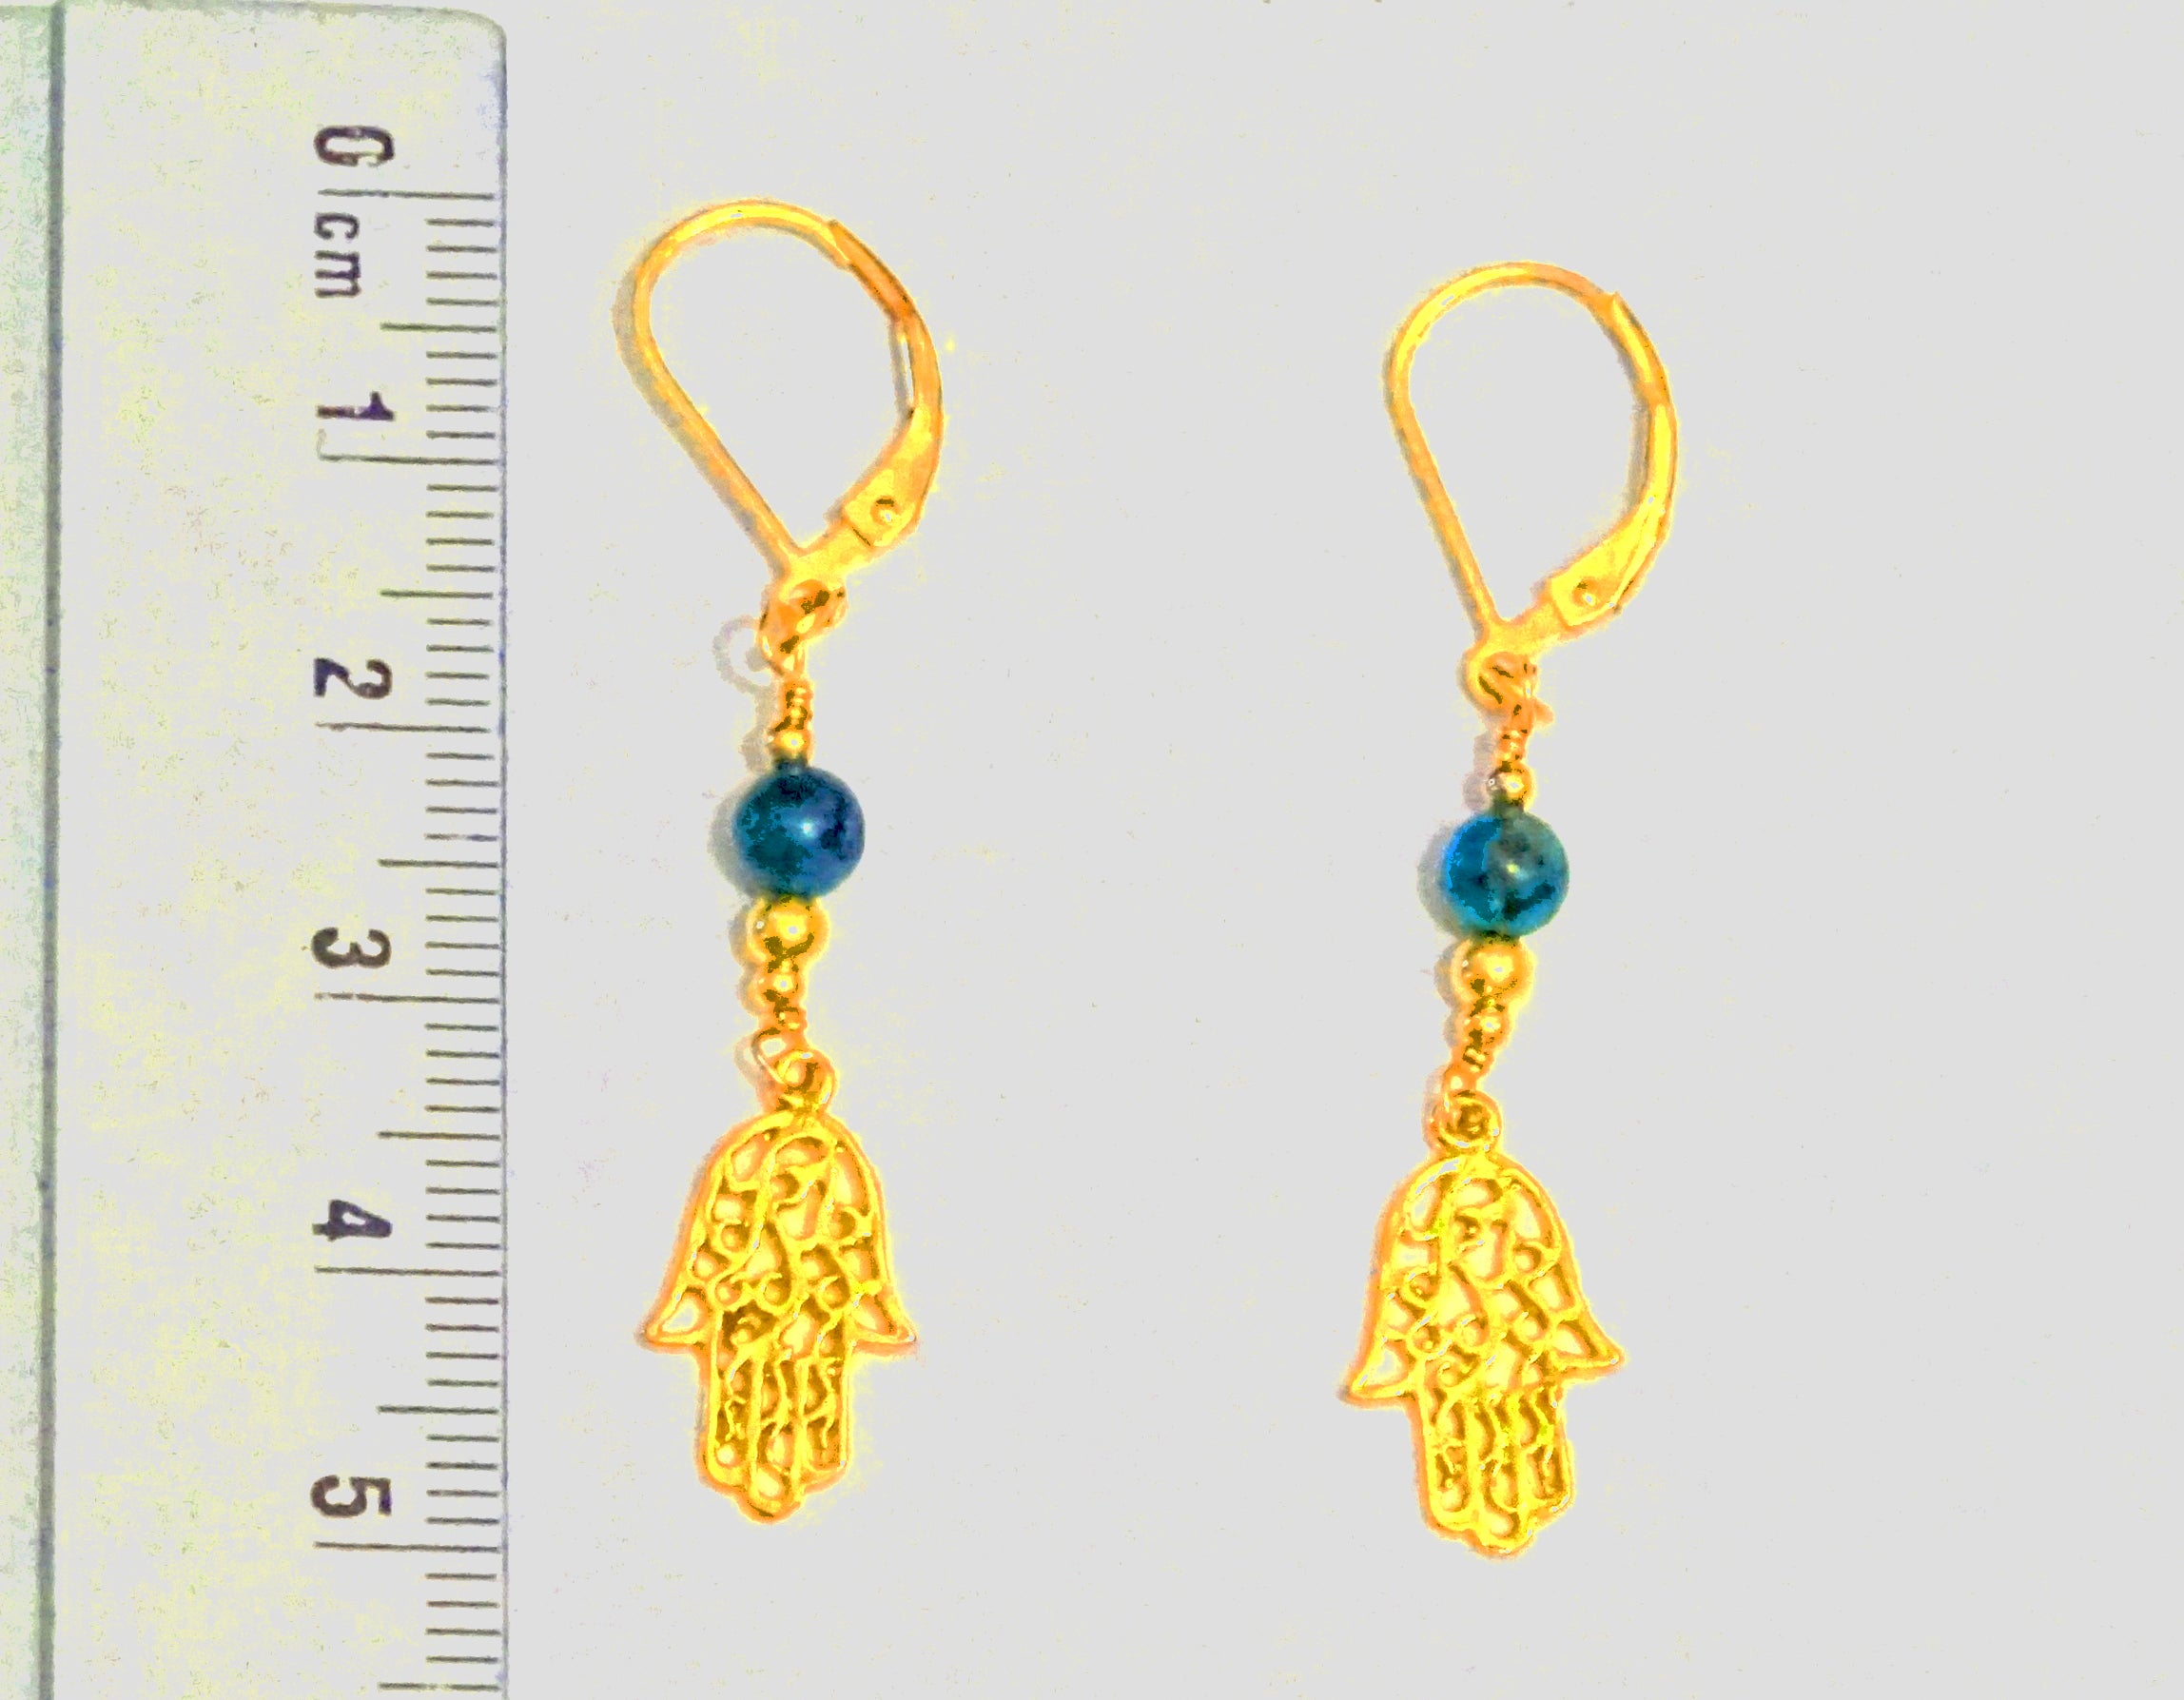 gold filled earring ,with gemstones Turquoise beads with Hamsa symbol